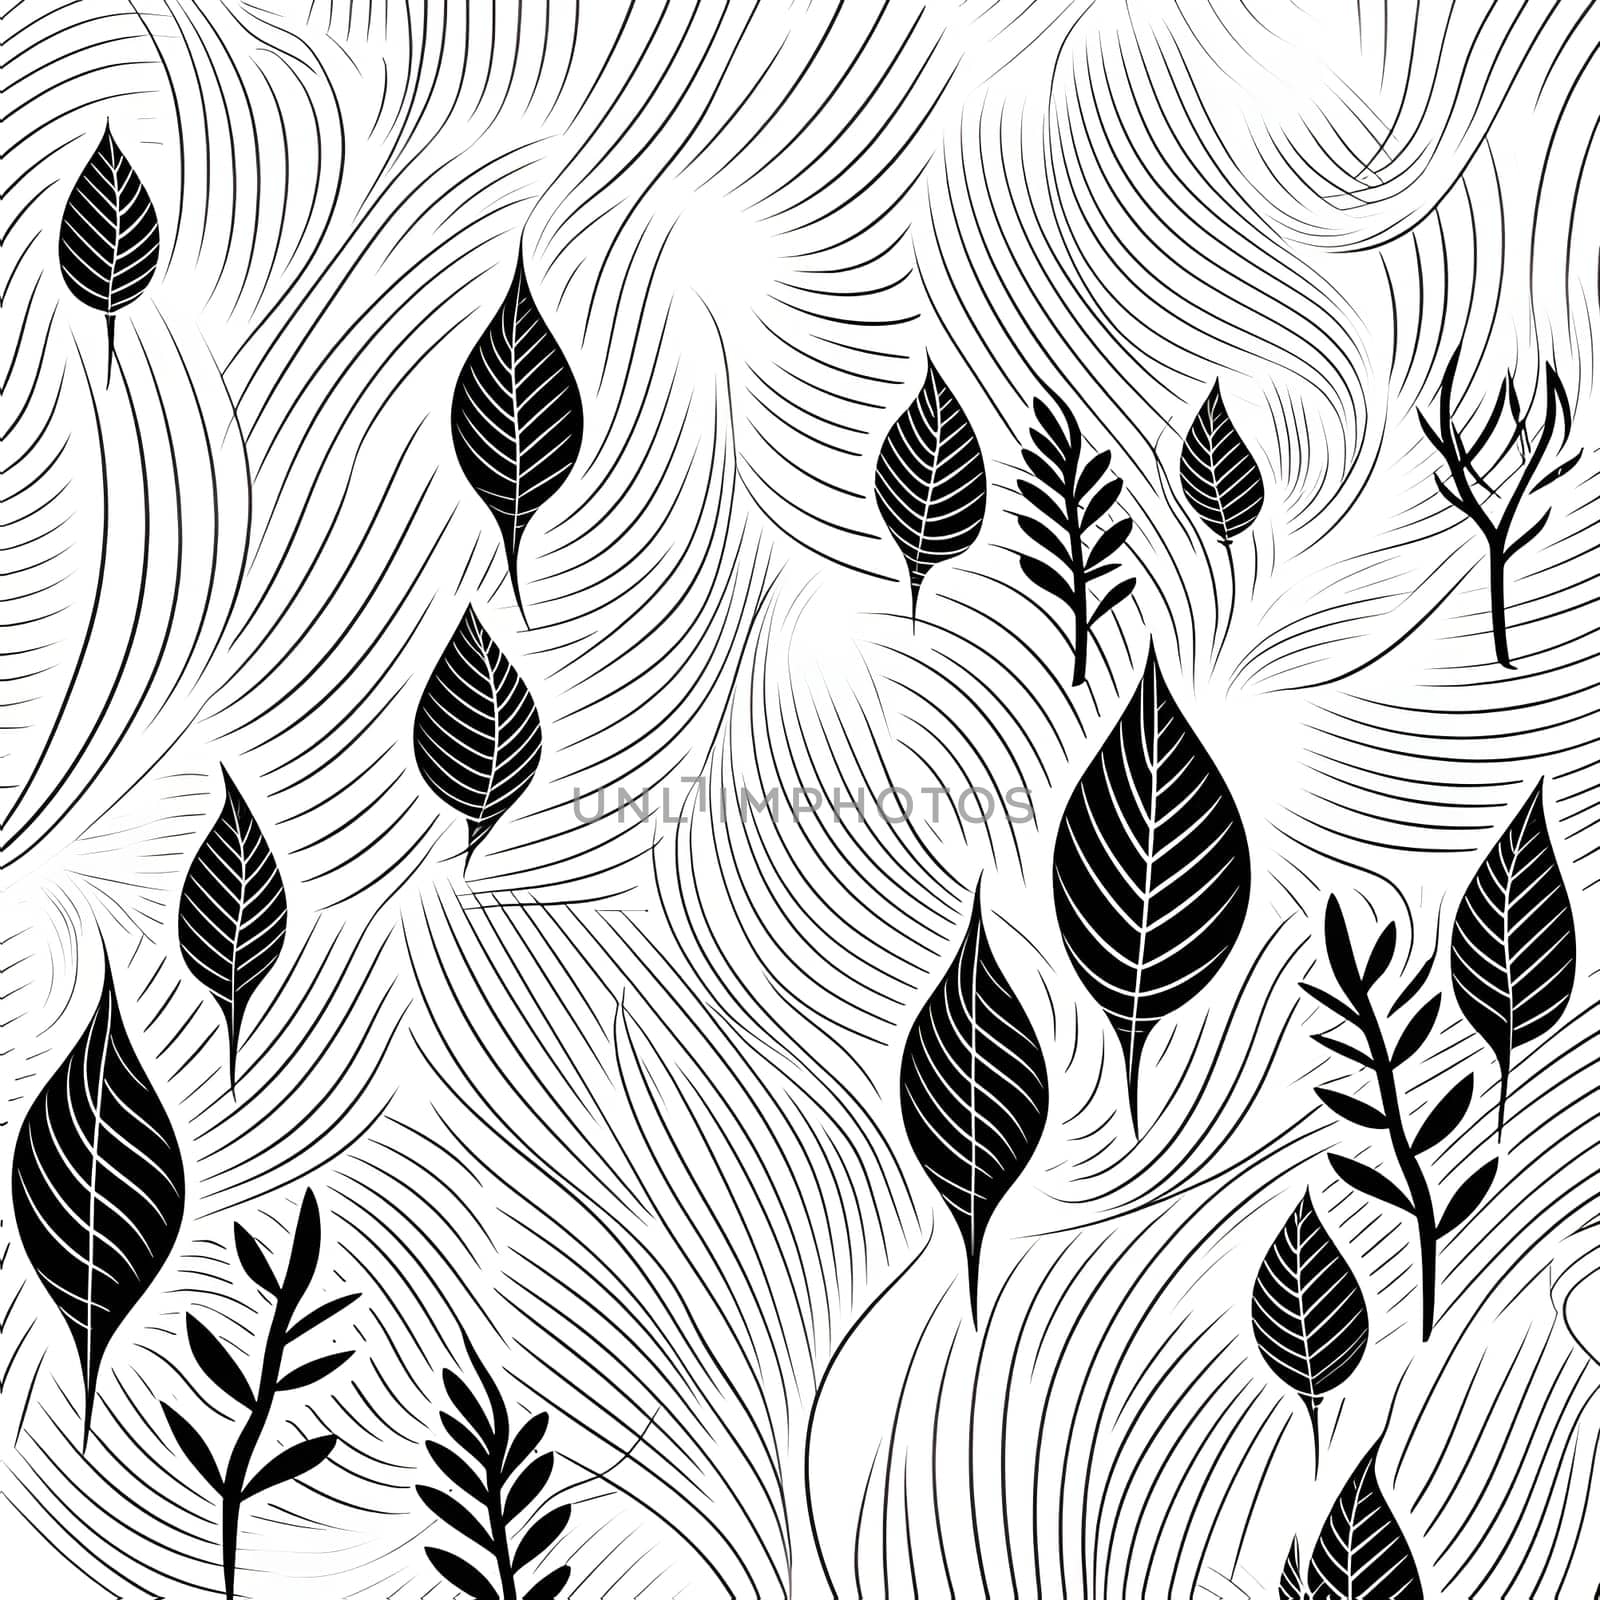 Patterns and banners backgrounds: Seamless pattern with leaves. Black and white vector illustration.